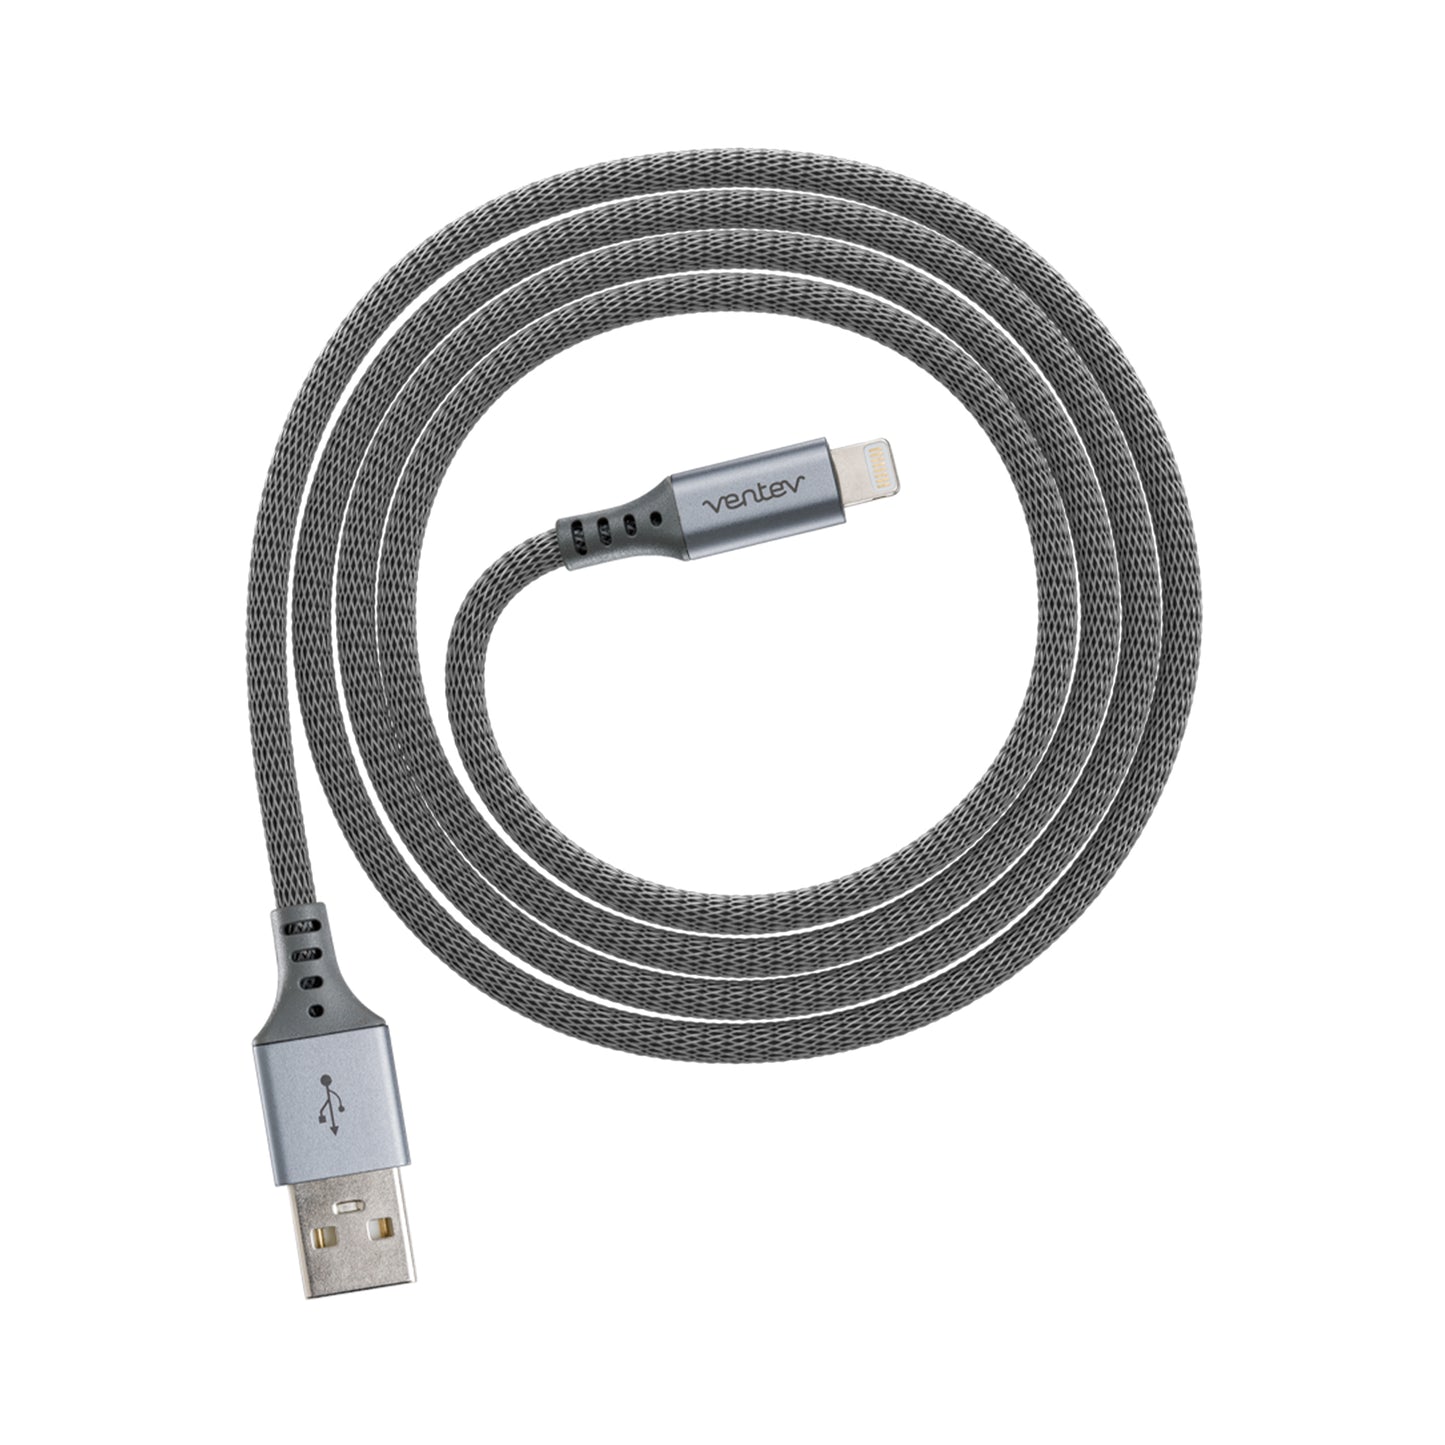 VENTEV Chargesync Alloy Lightning Cable 1.2m - Steel Gray